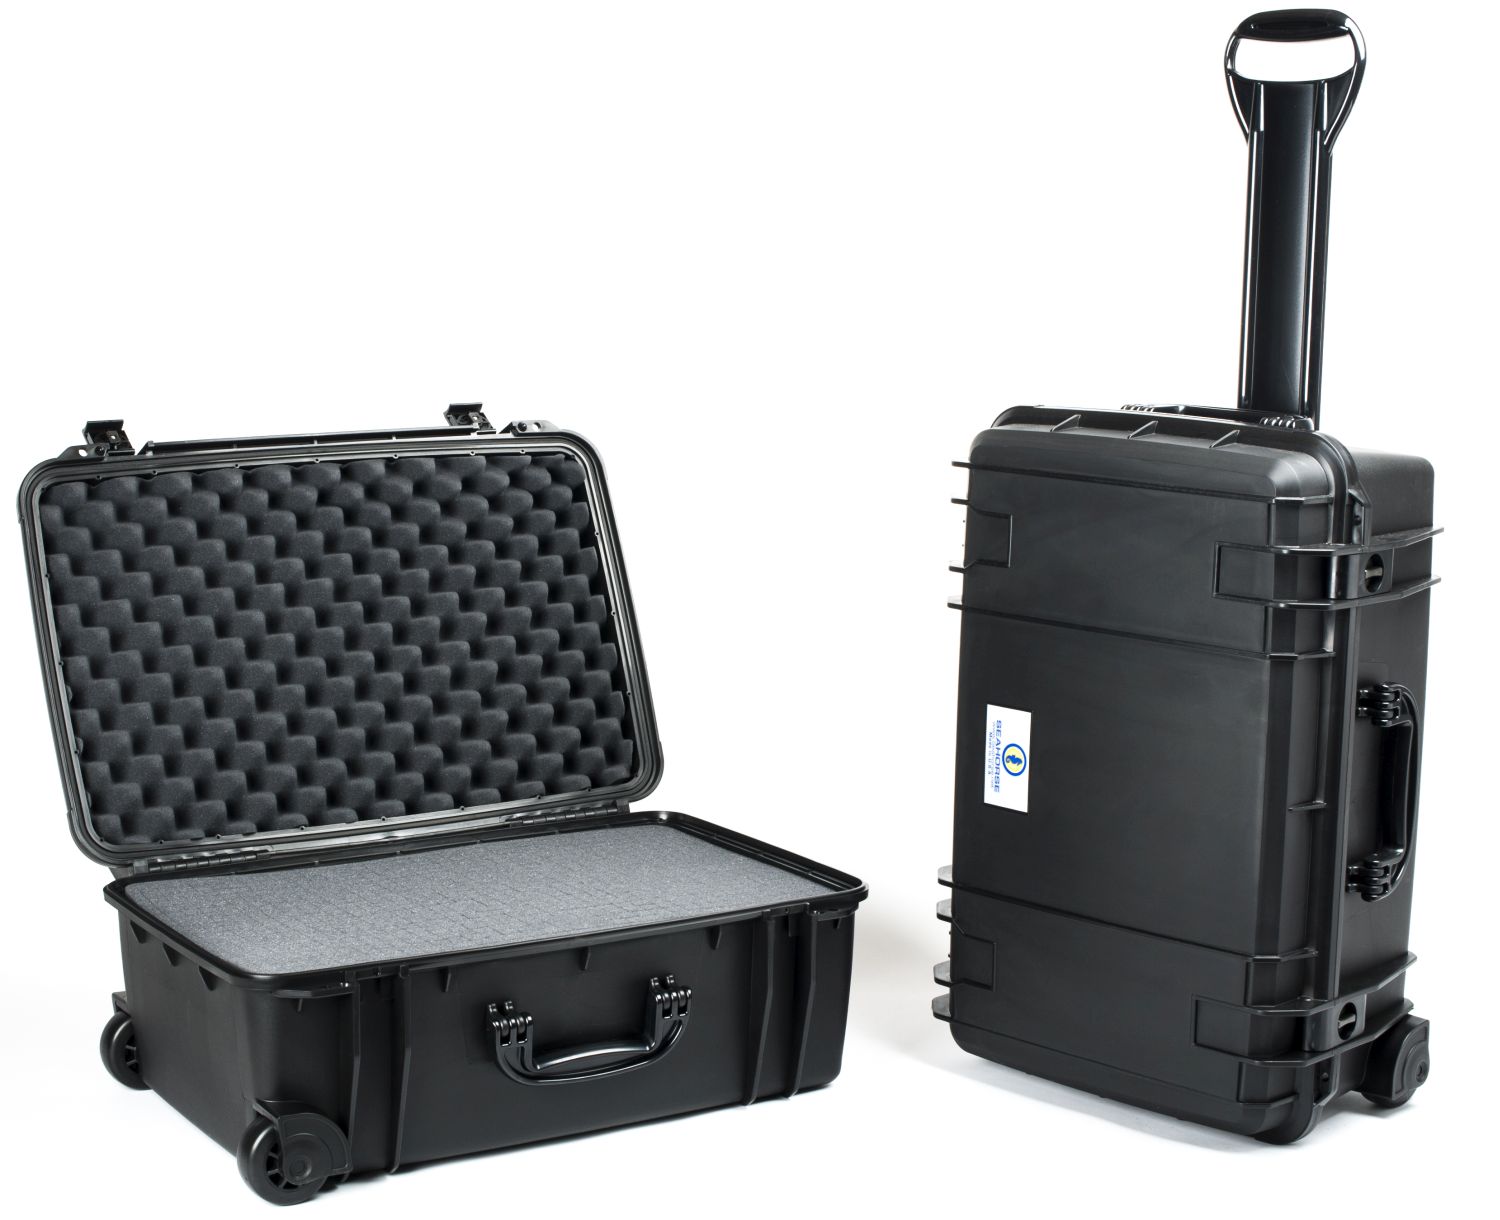 Seahorse SE-920 Protective Case Without Foam